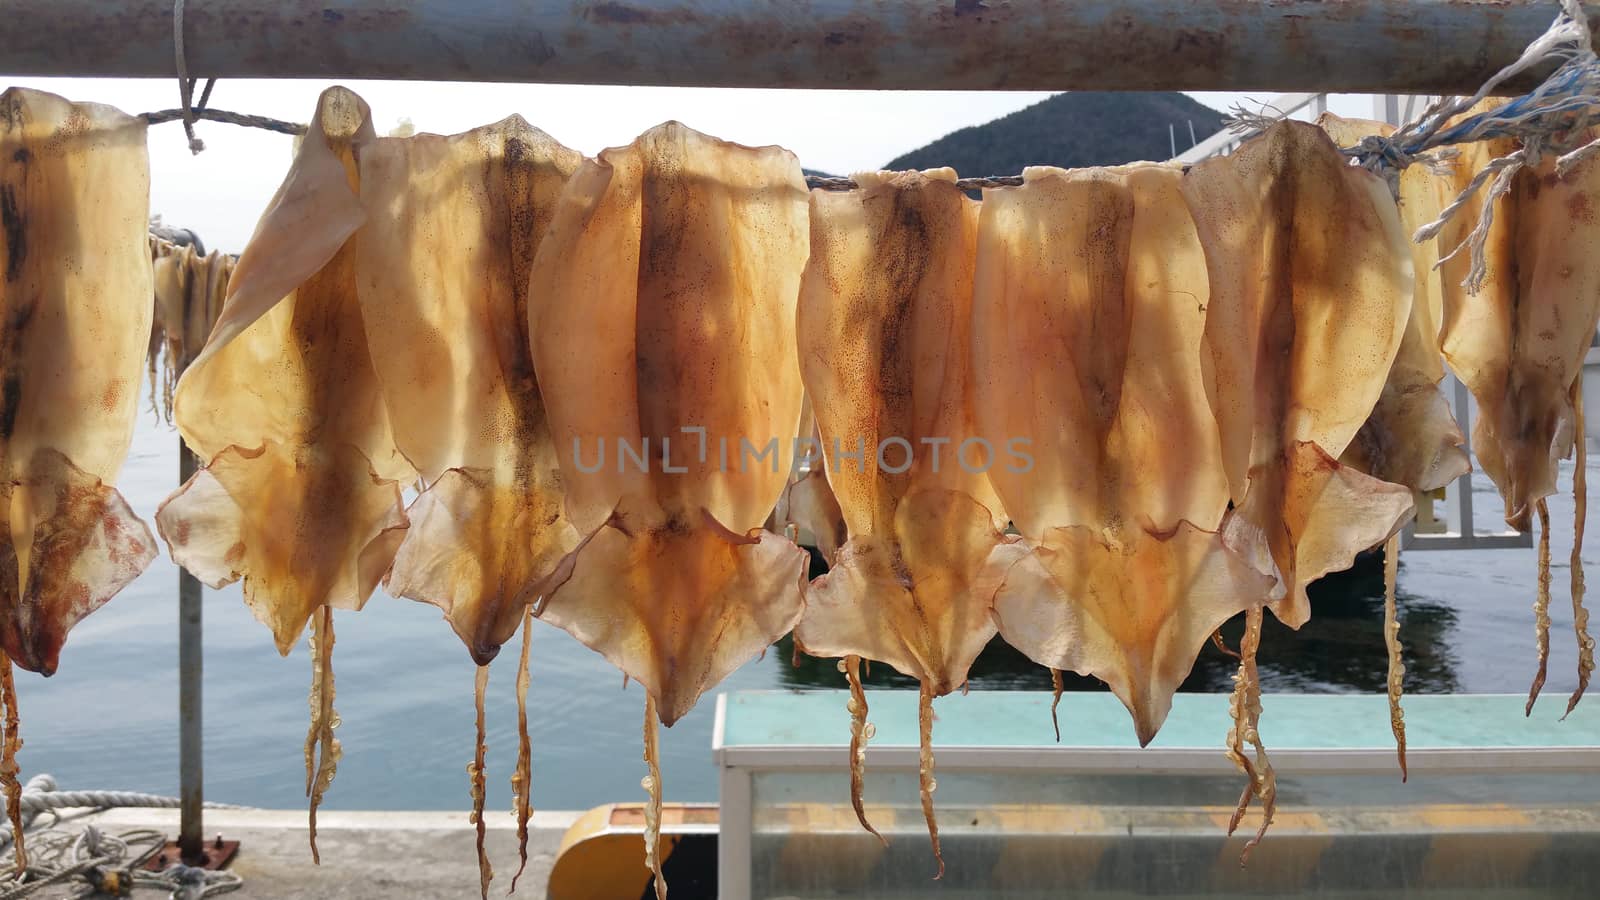 Squids drying in the sunlight in a fish market in Japan by uphotopia